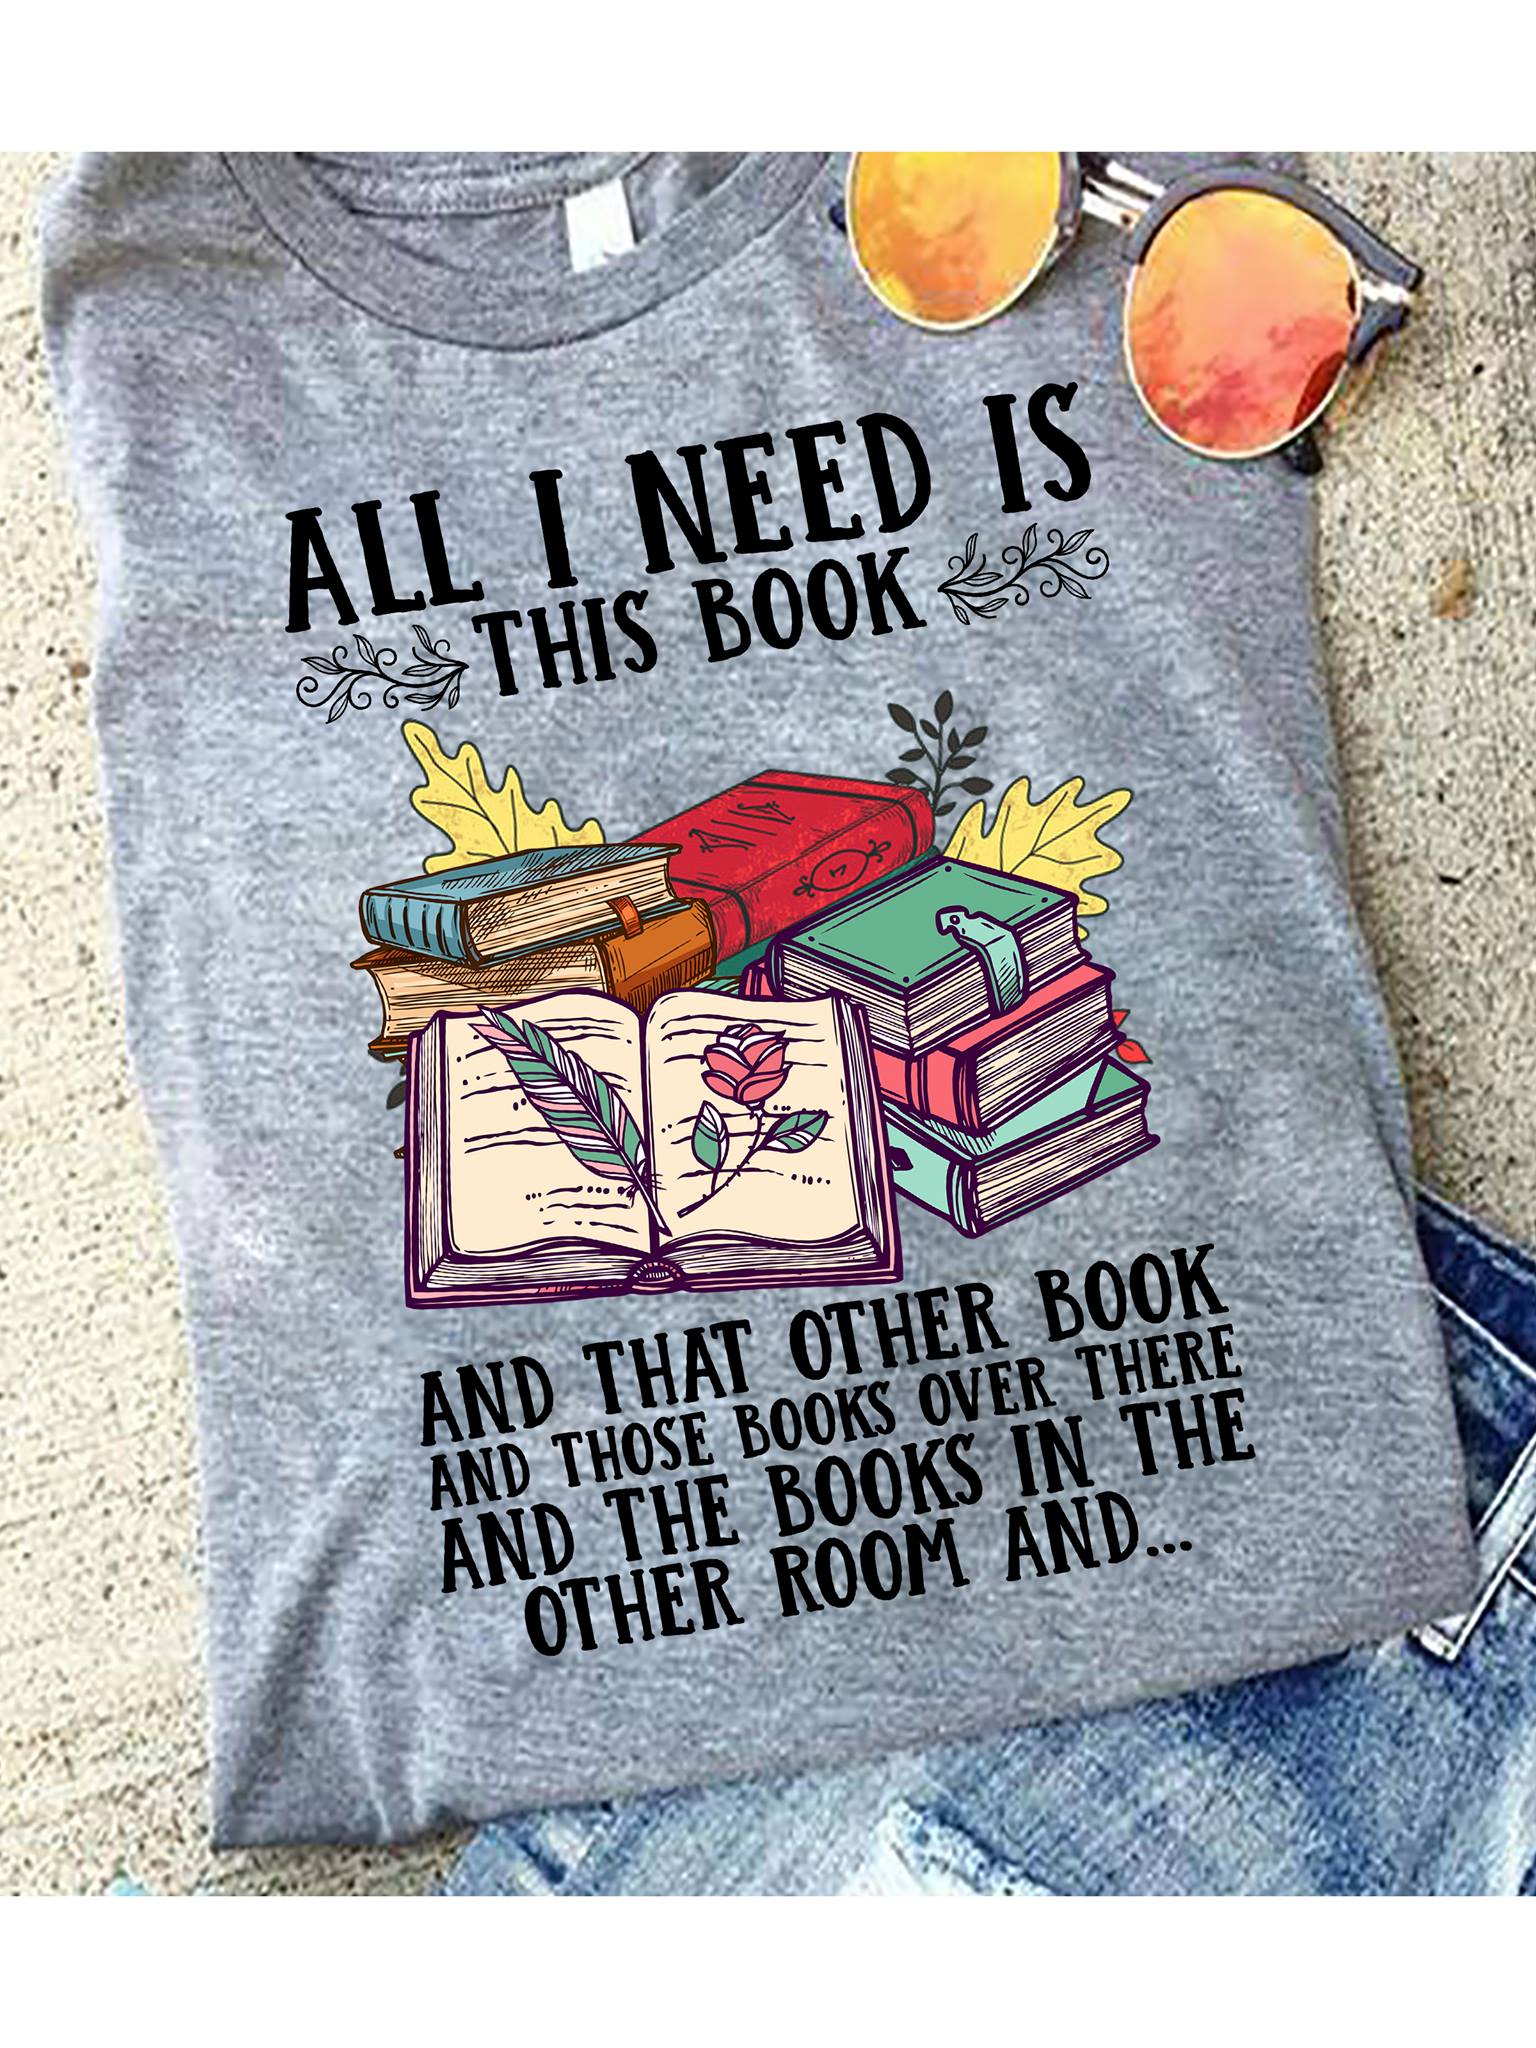 All I need is this book and that other book and those books over there - Book lover